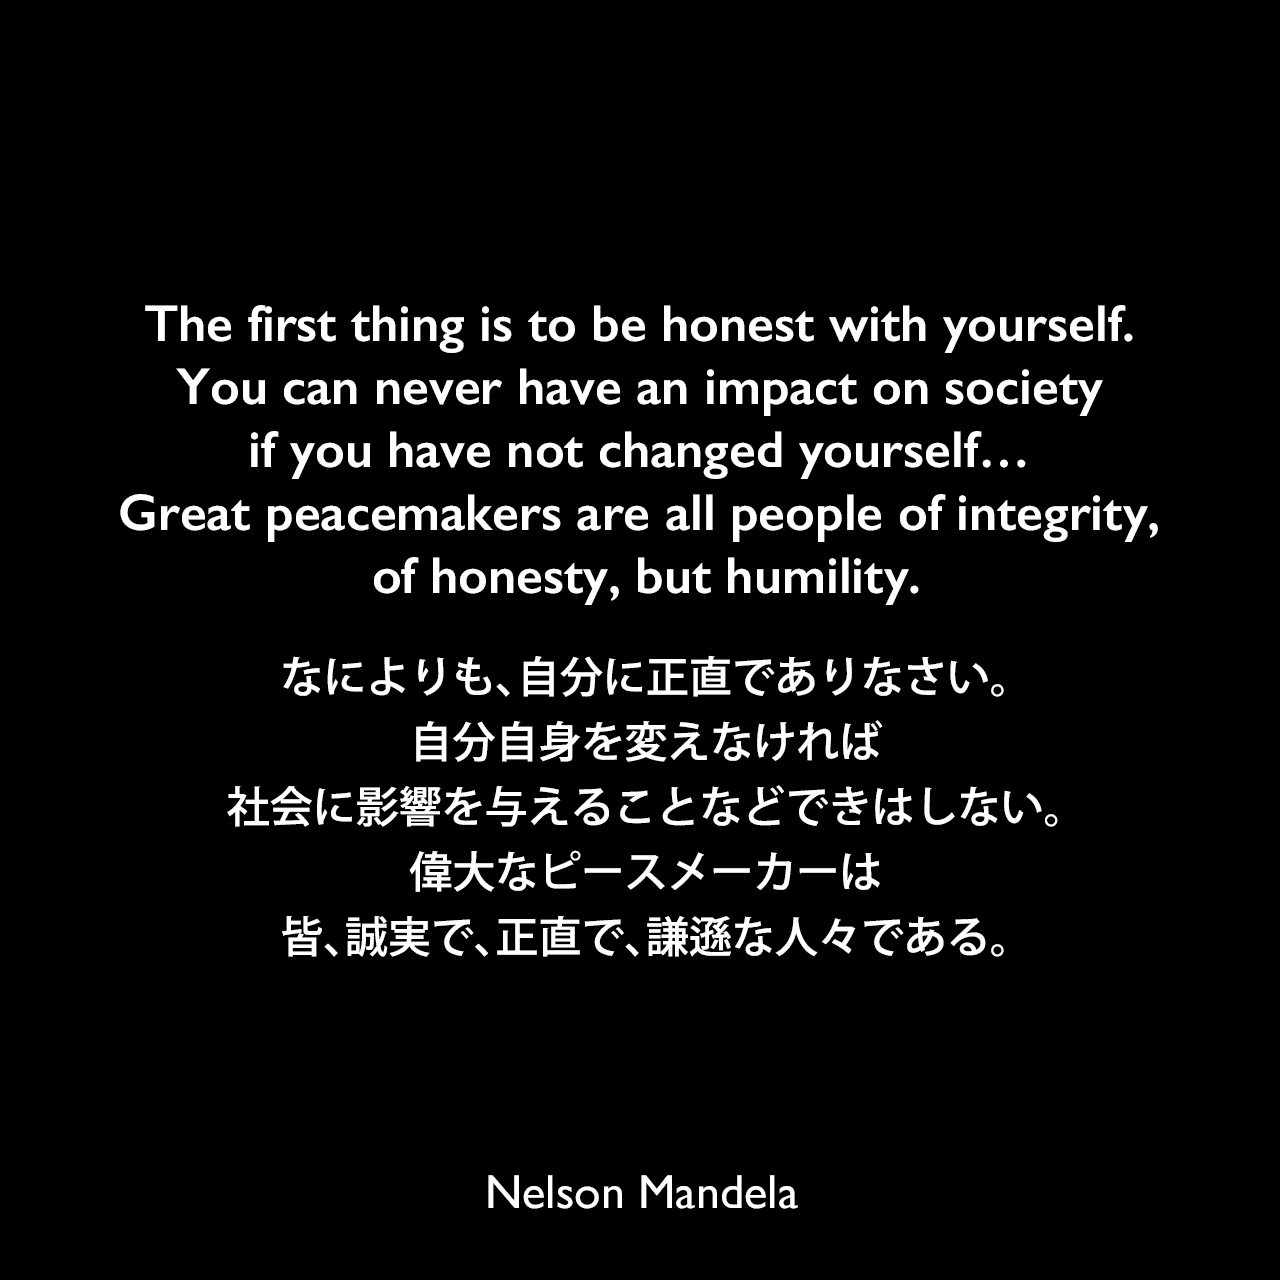 The first thing is to be honest with yourself. You can never have an impact on society if you have not changed yourself… Great peacemakers are all people of integrity, of honesty, but humility.なによりも、自分に正直でありなさい。自分自身を変えなければ、社会に影響を与えることなどできはしない。偉大なピースメーカーは皆、誠実で、正直で、謙遜な人々である。Nelson Mandela